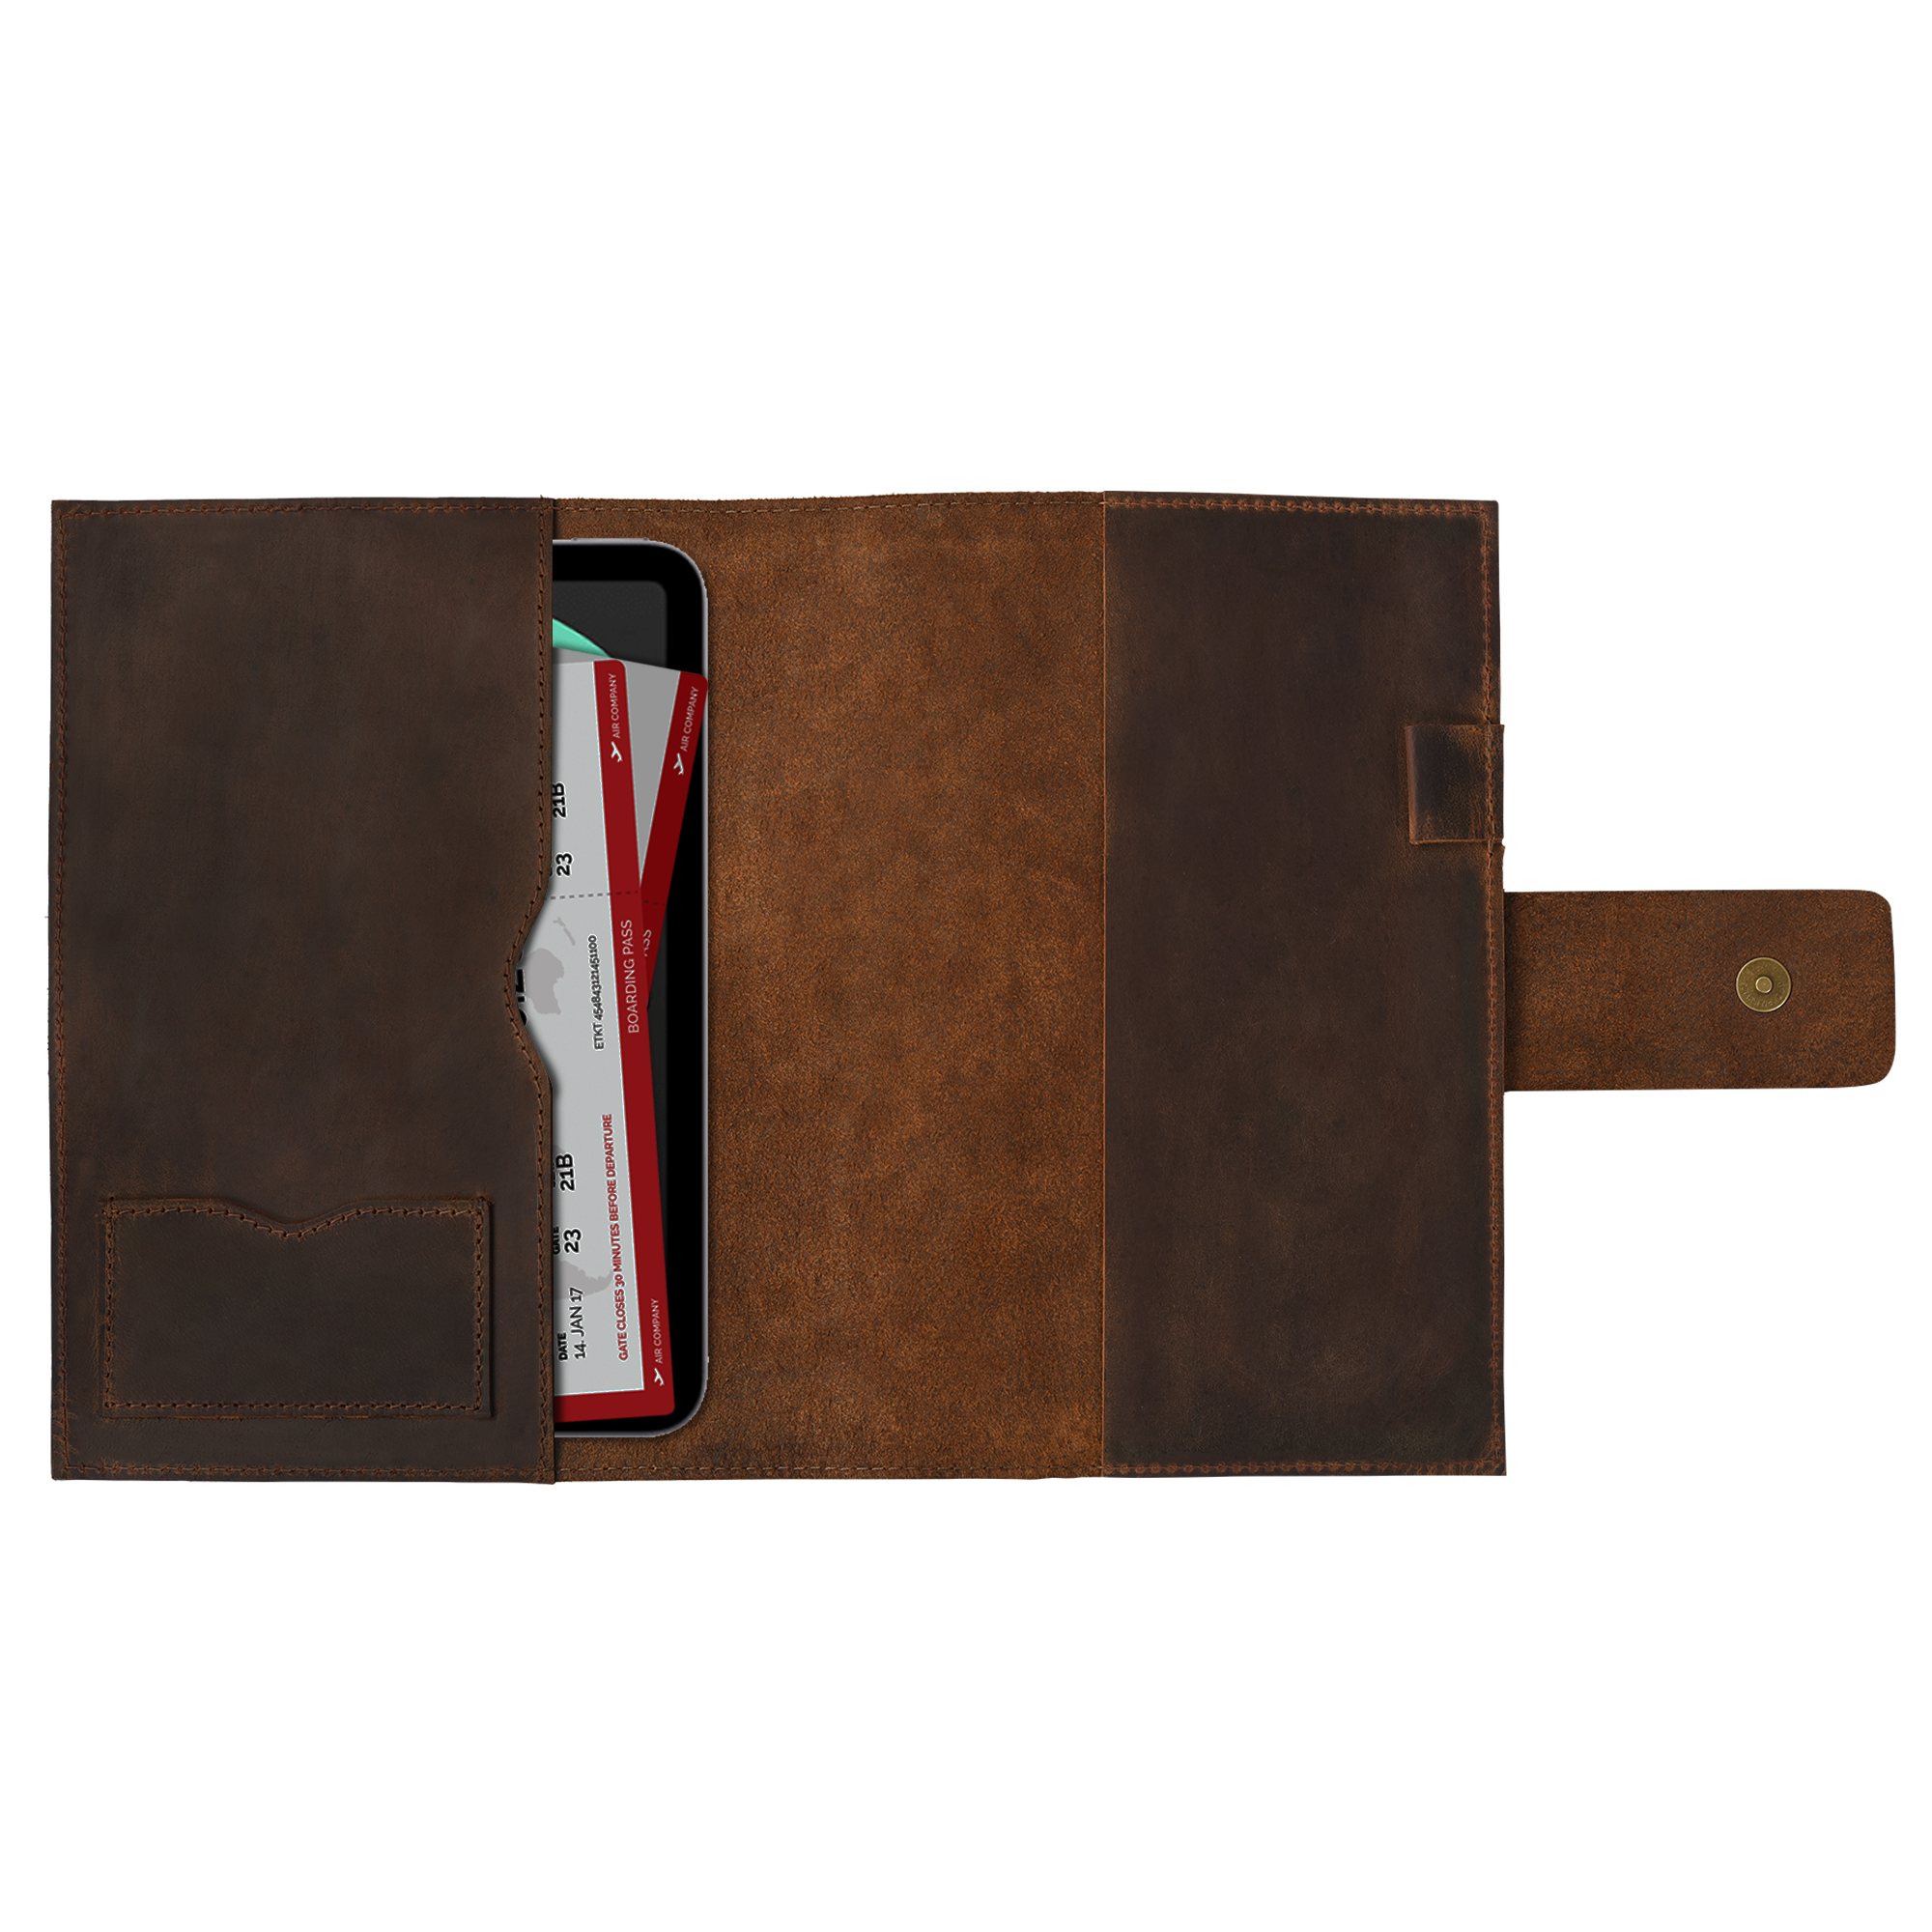 Leather Artisan Sketchbook -Hand crafted Italian Artisan Made